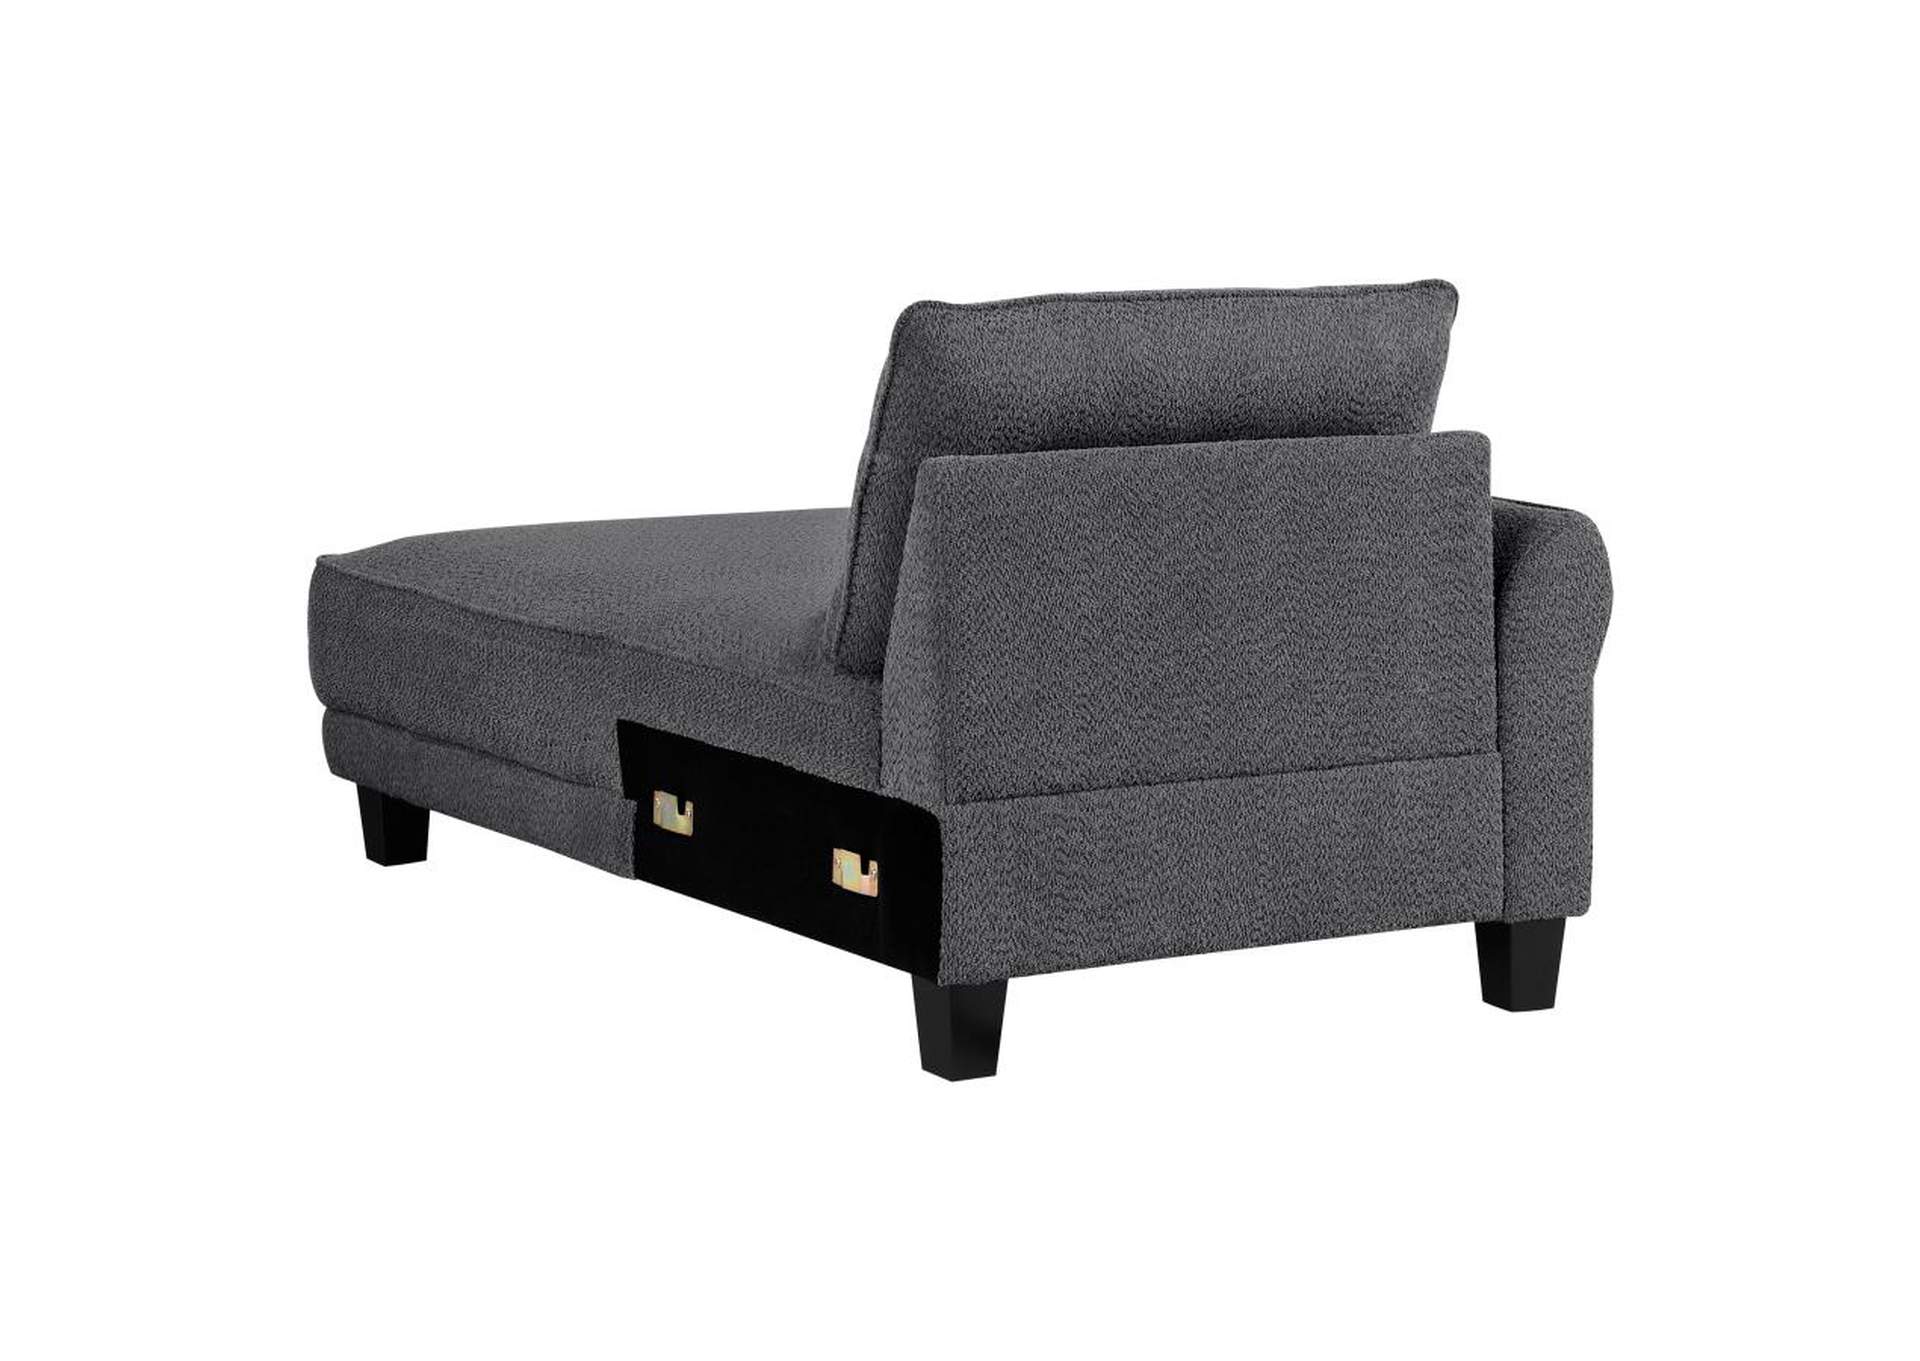 Caspian Upholstered Curved Arms Sectional Sofa Grey,Coaster Furniture